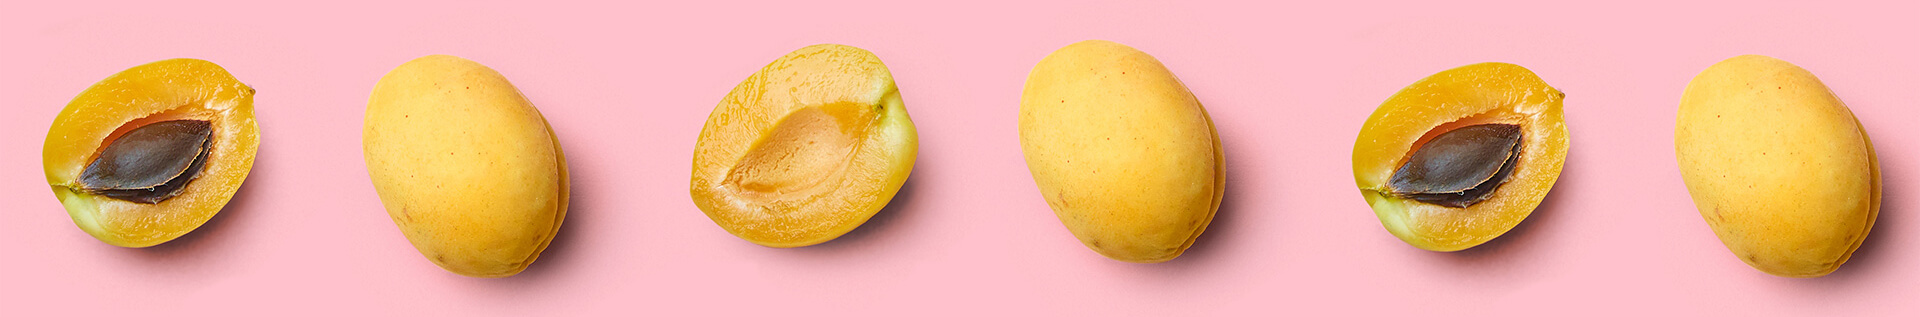 Row of sweet lemons against a pink background